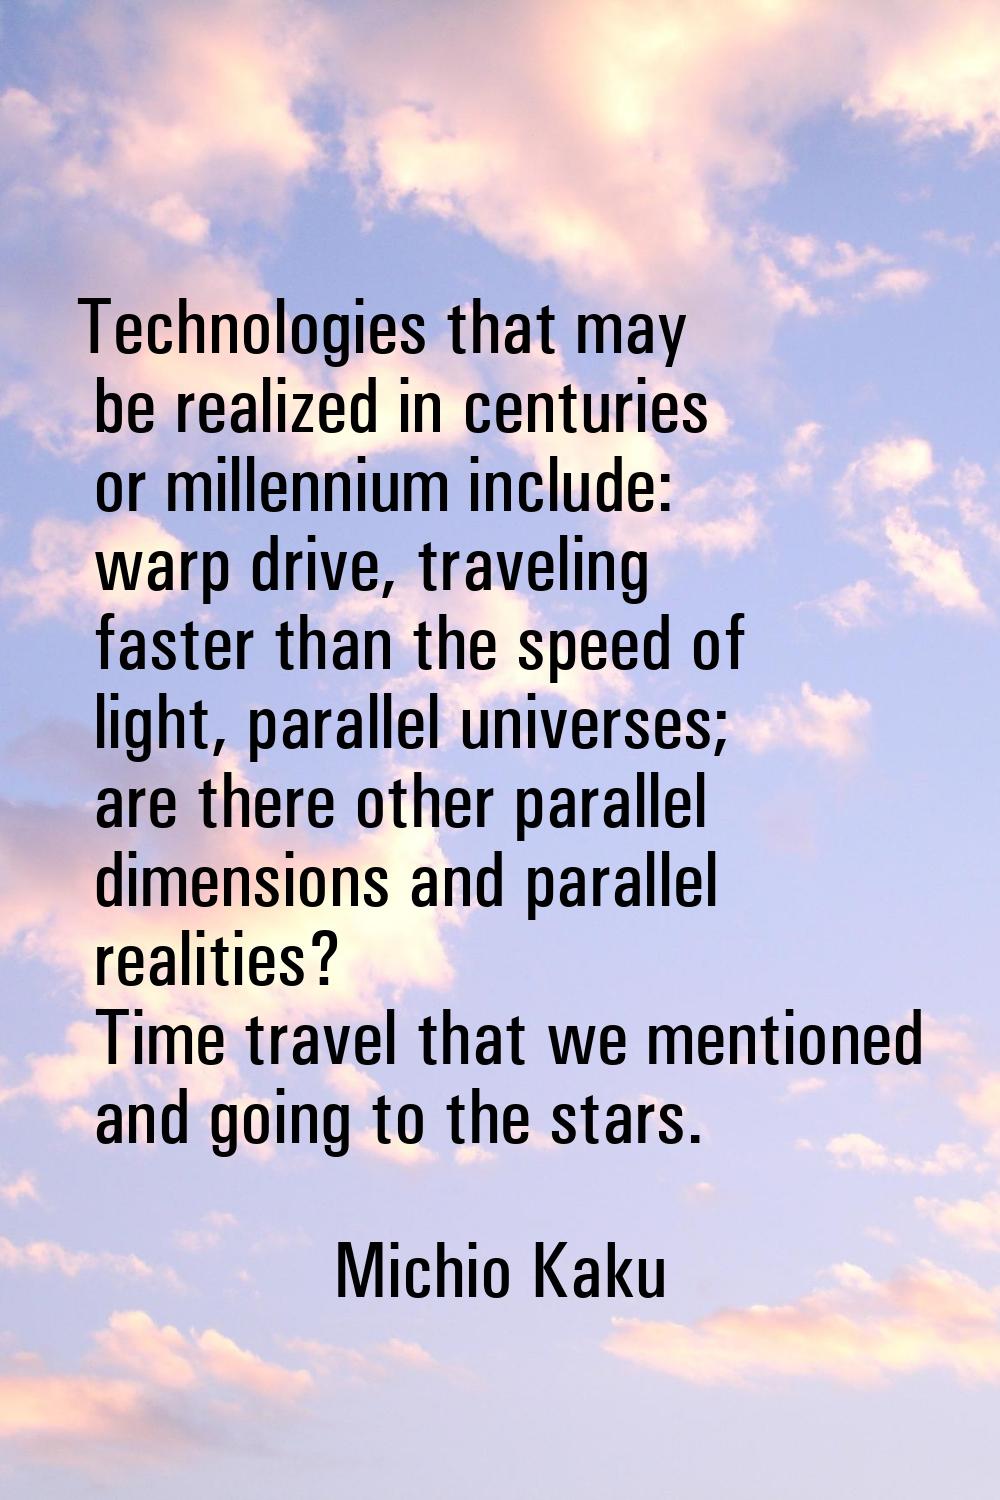 Technologies that may be realized in centuries or millennium include: warp drive, traveling faster 